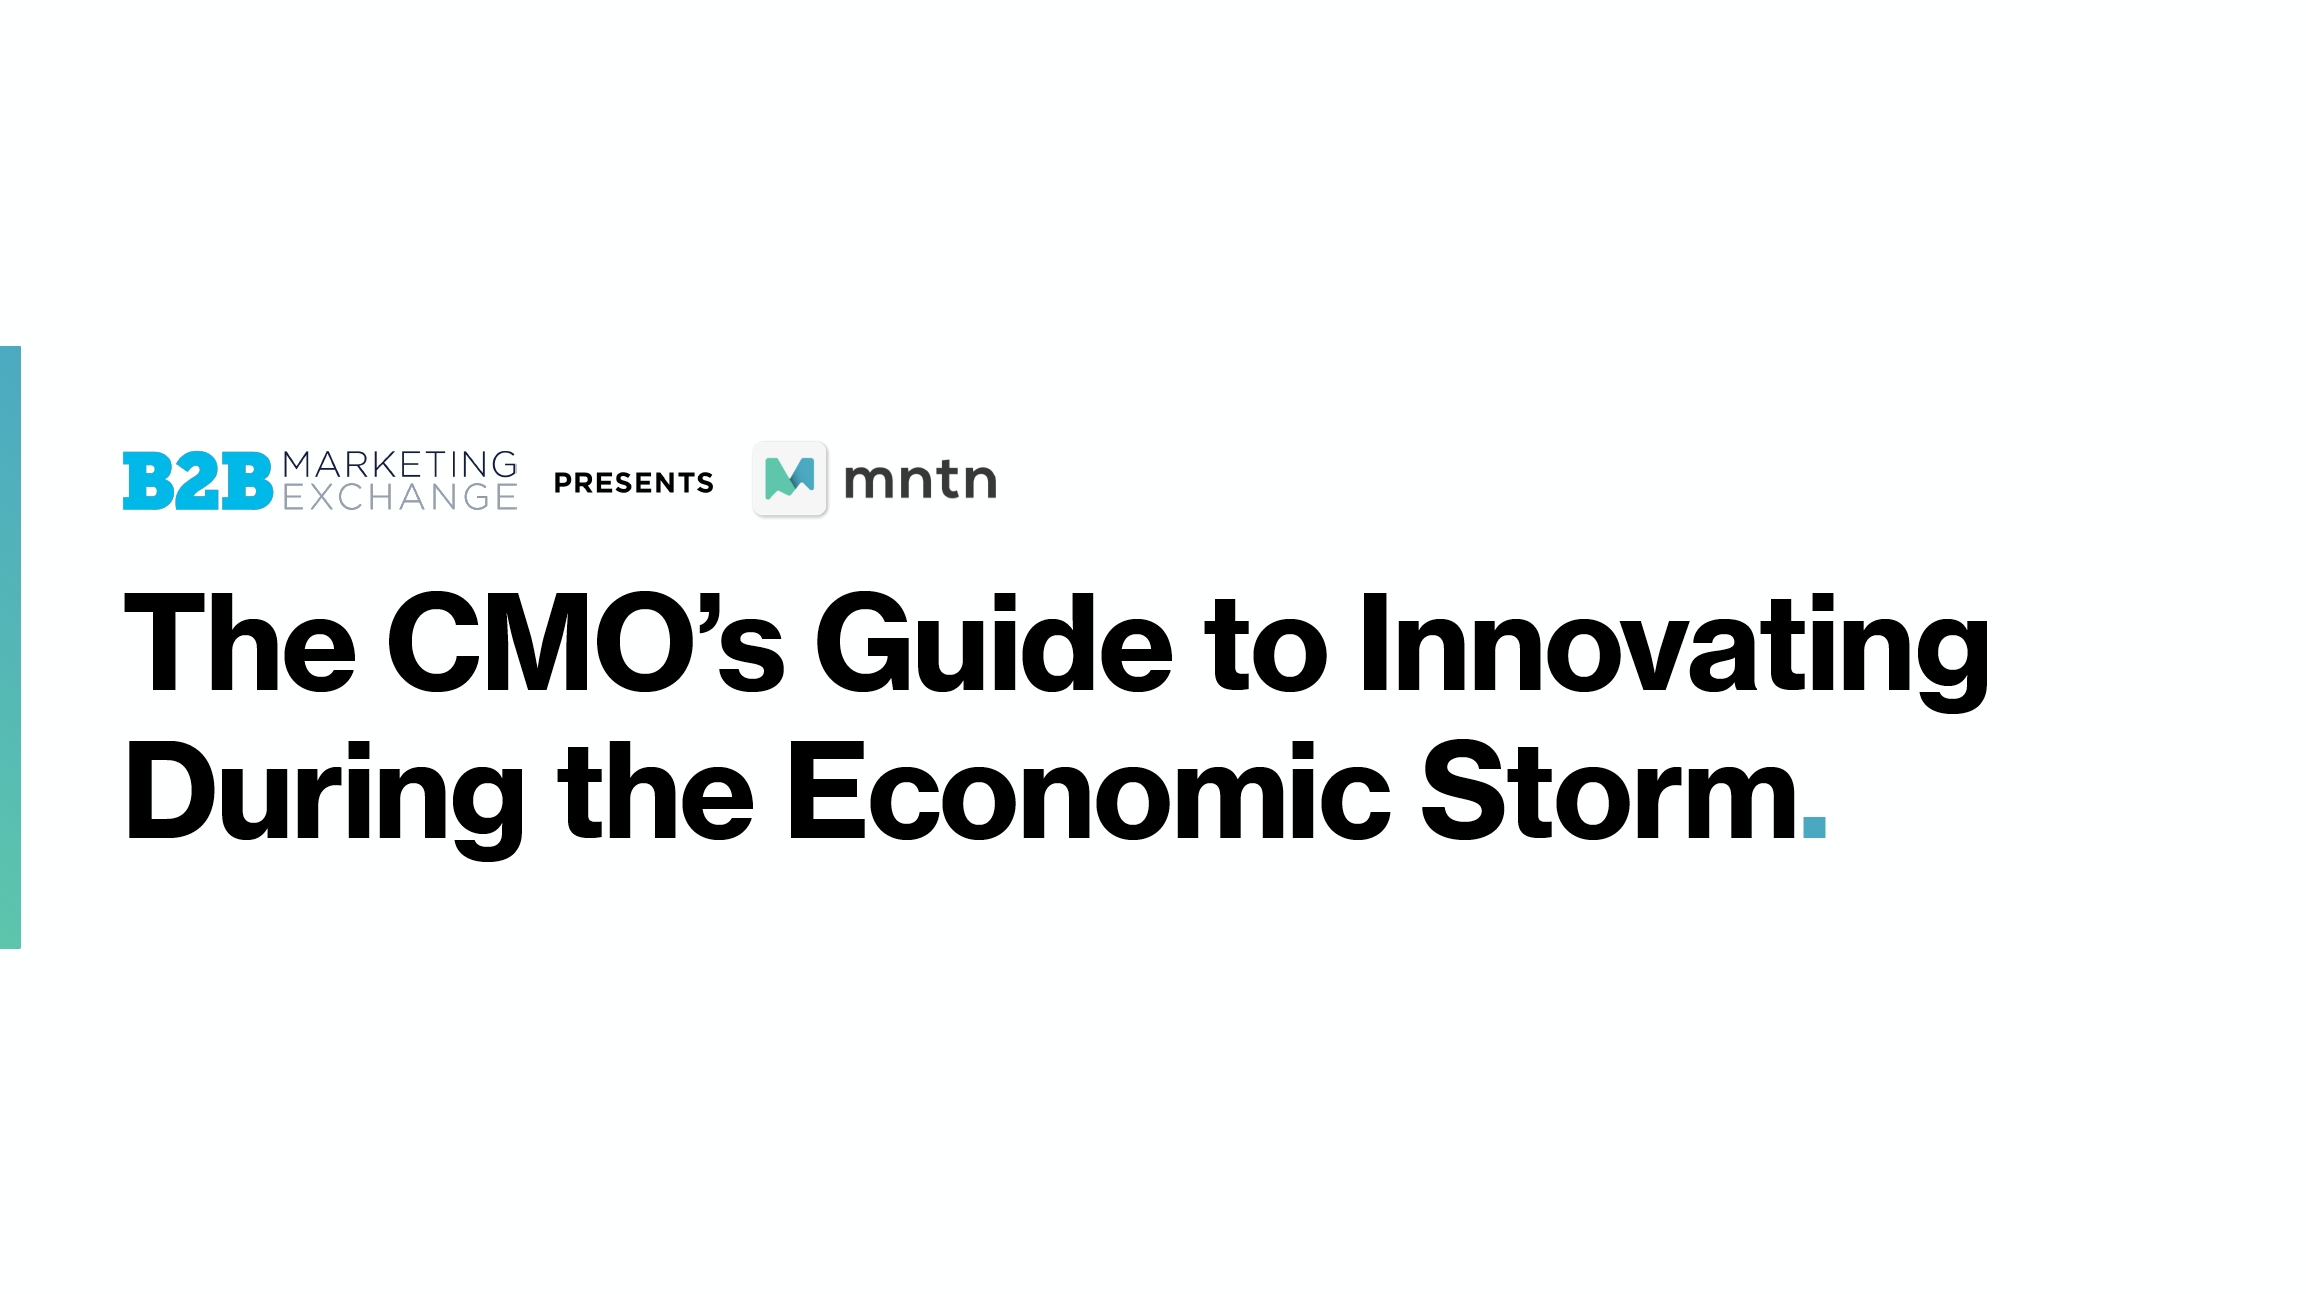 The CMO’s Guide To Innovating During The Economic Storm